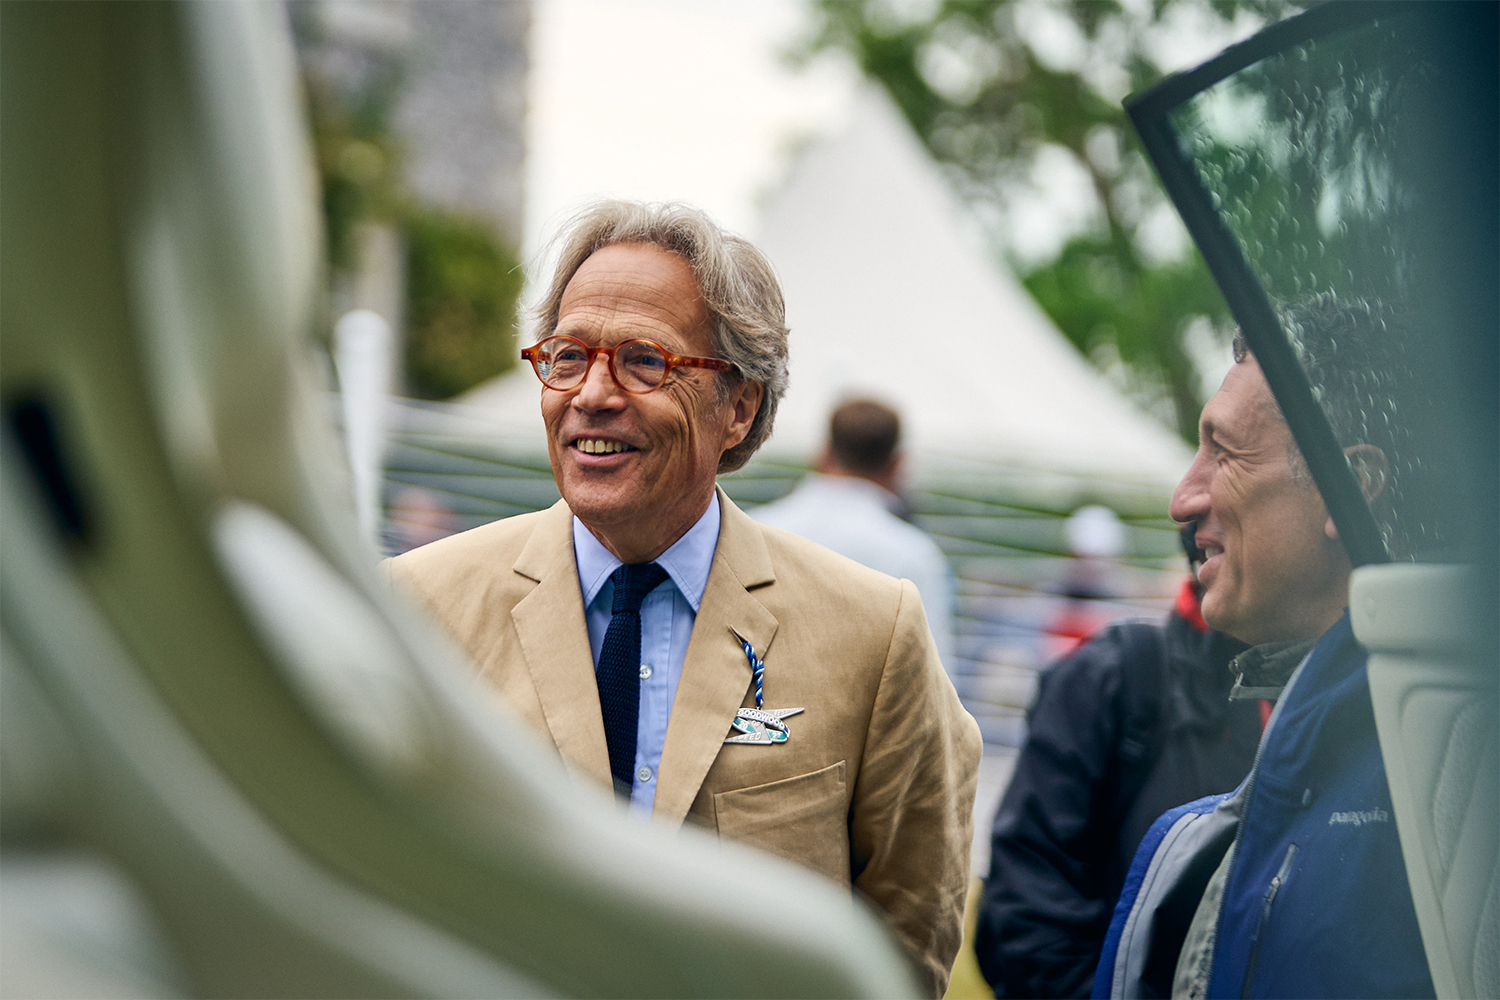 Charles Gordon-Lennox, the 11th Duke of Richmond, seen here in a tan suit at the 2022 Goodwood Festival of Speed